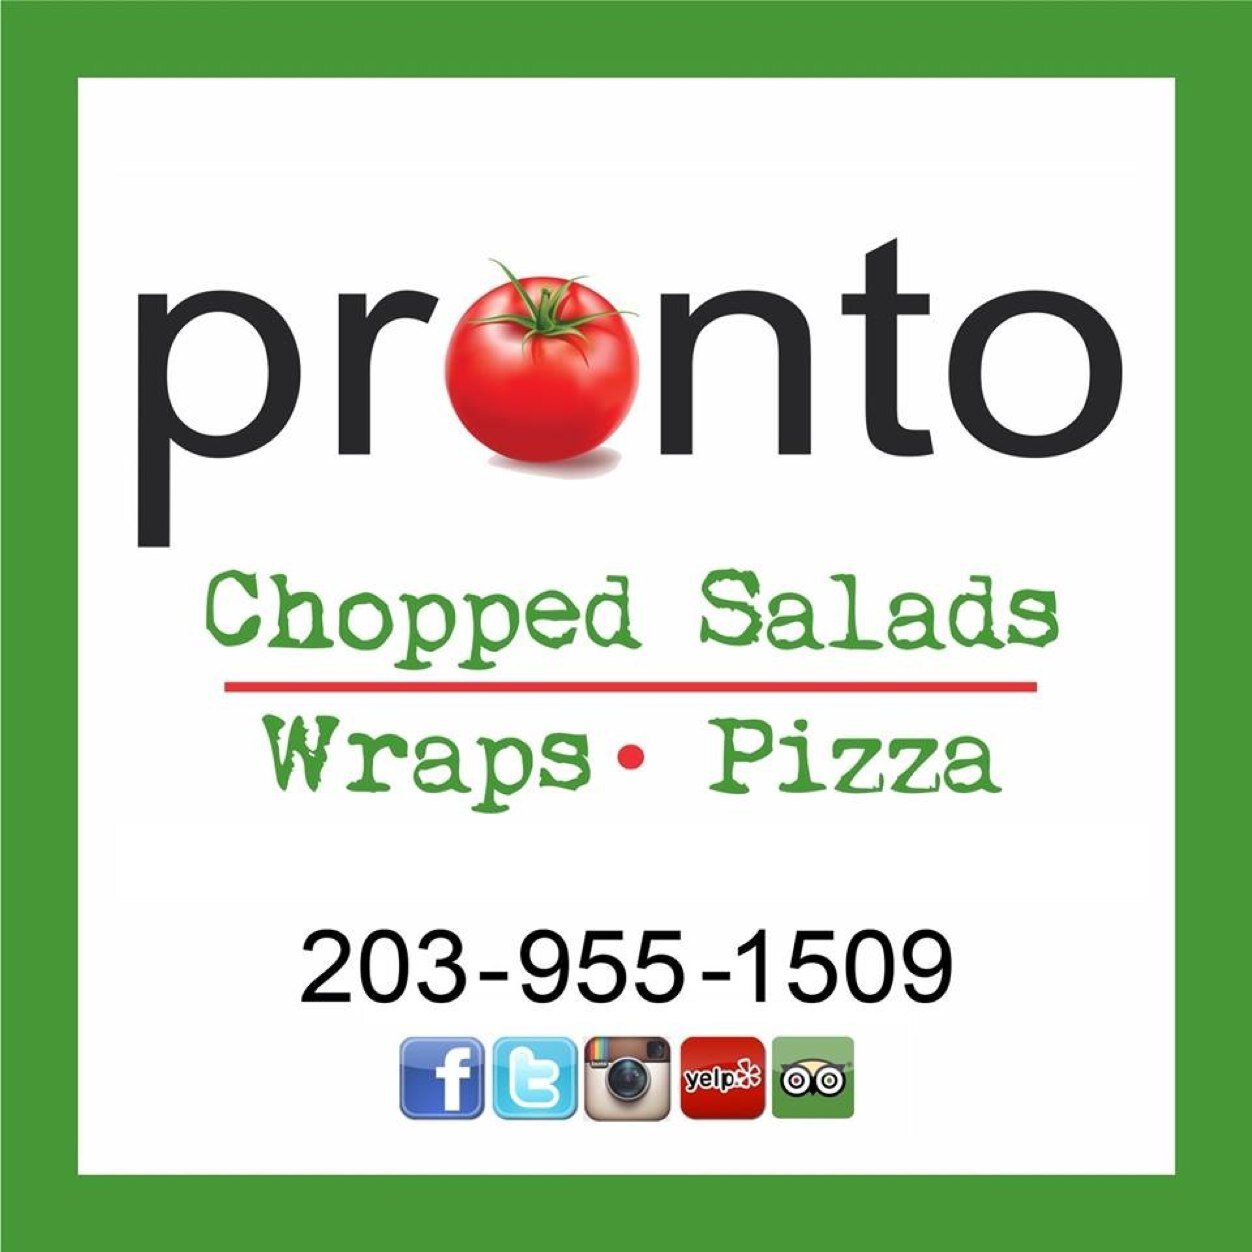 Home of the worlds Freshest Chopped Salads, Wraps, Soups and the home of the Original Chopped Salad Pizza!